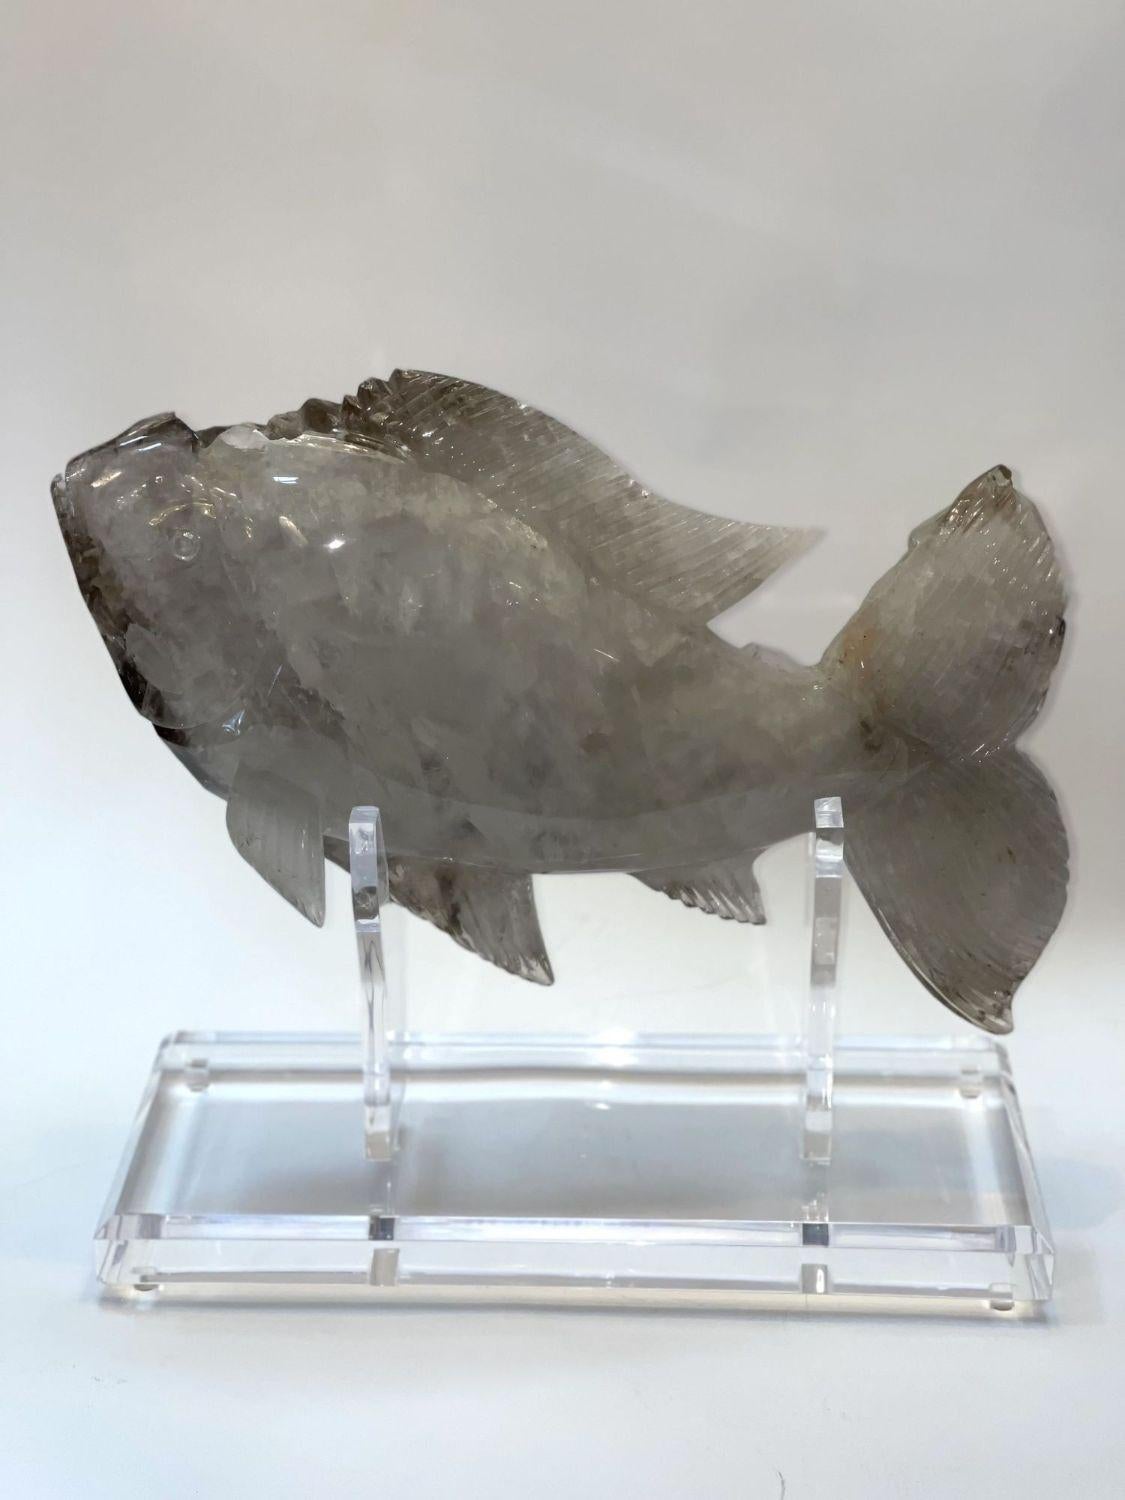 Rock crystal fish sculpture on acrylic base. Made in Brazil (c. 1980s)
 
Dimensions:
 
Sculpture with base: 16